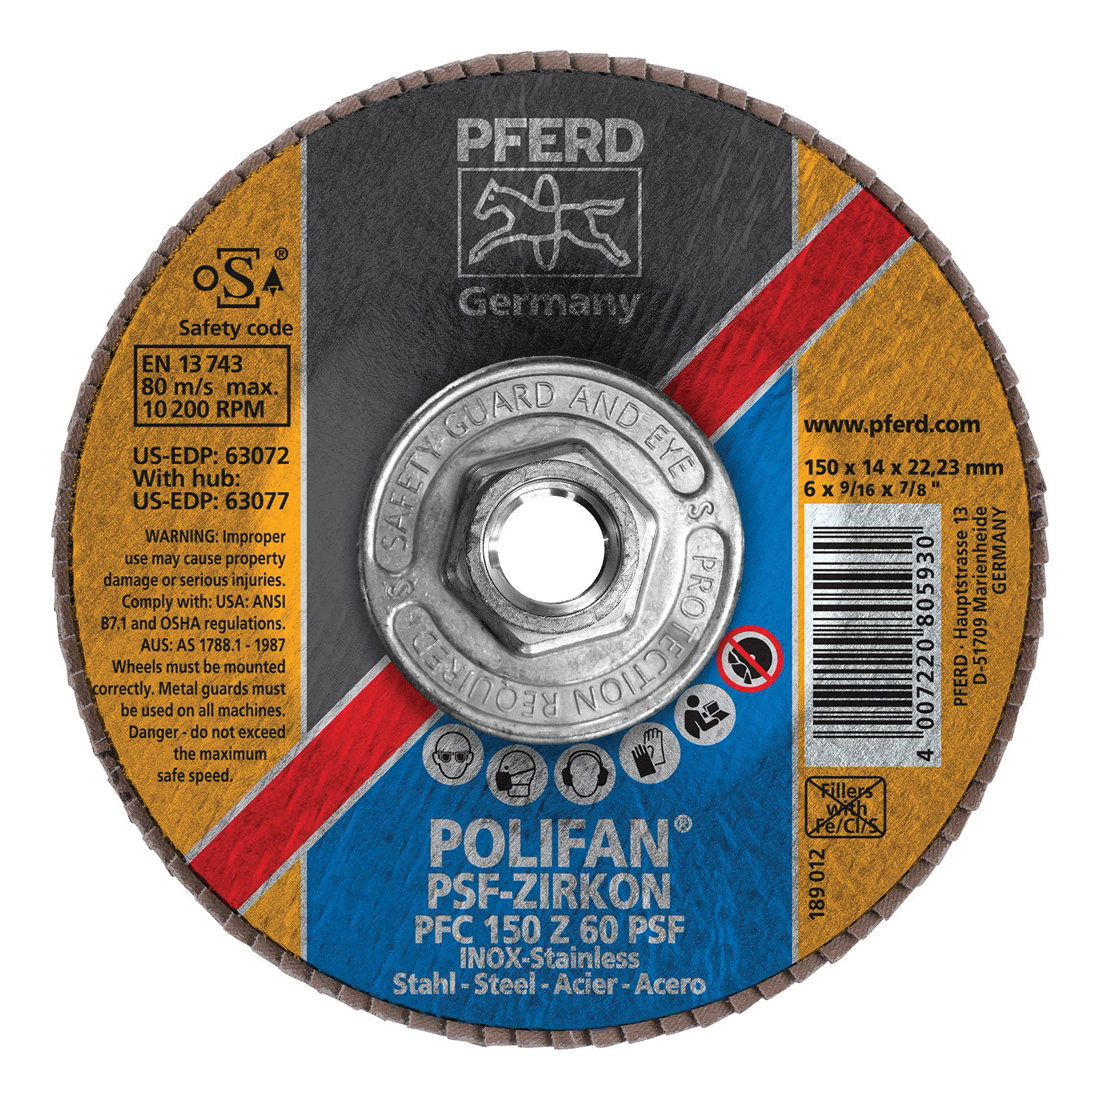 PFERD Polifan® 63077 Universal Line PSF-Z Threaded Coated Abrasive Flap Disc, 6 in Dia, 60 Grit, Zirconia Alumina Abrasive, Type 29 Conical Disc